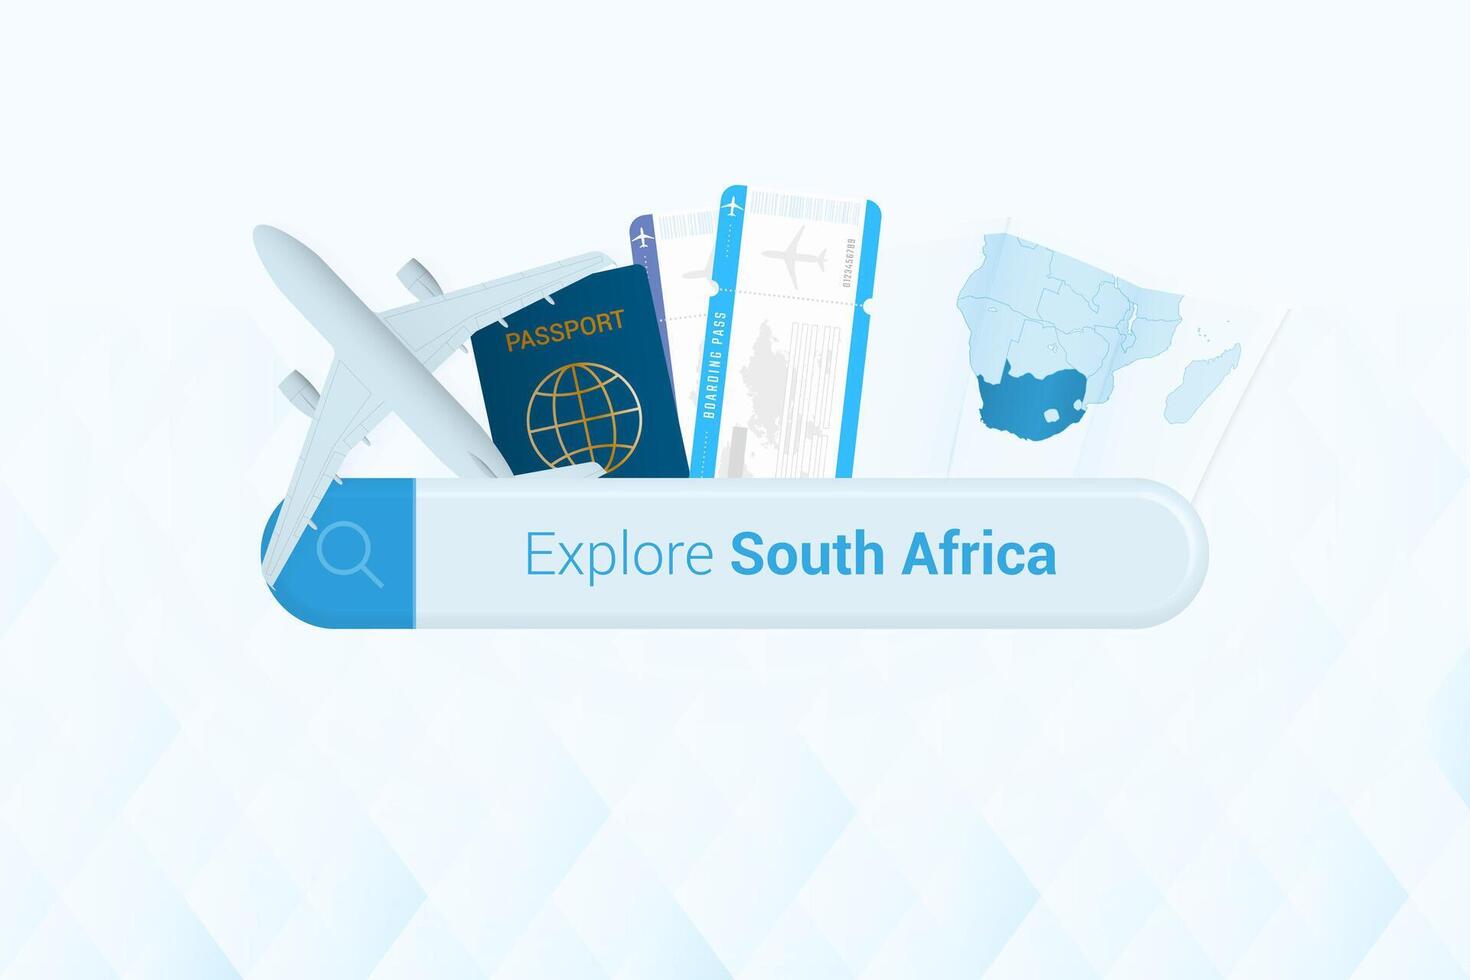 Searching tickets to South Africa or travel destination in South Africa. Searching bar with airplane, passport, boarding pass, tickets and map. vector